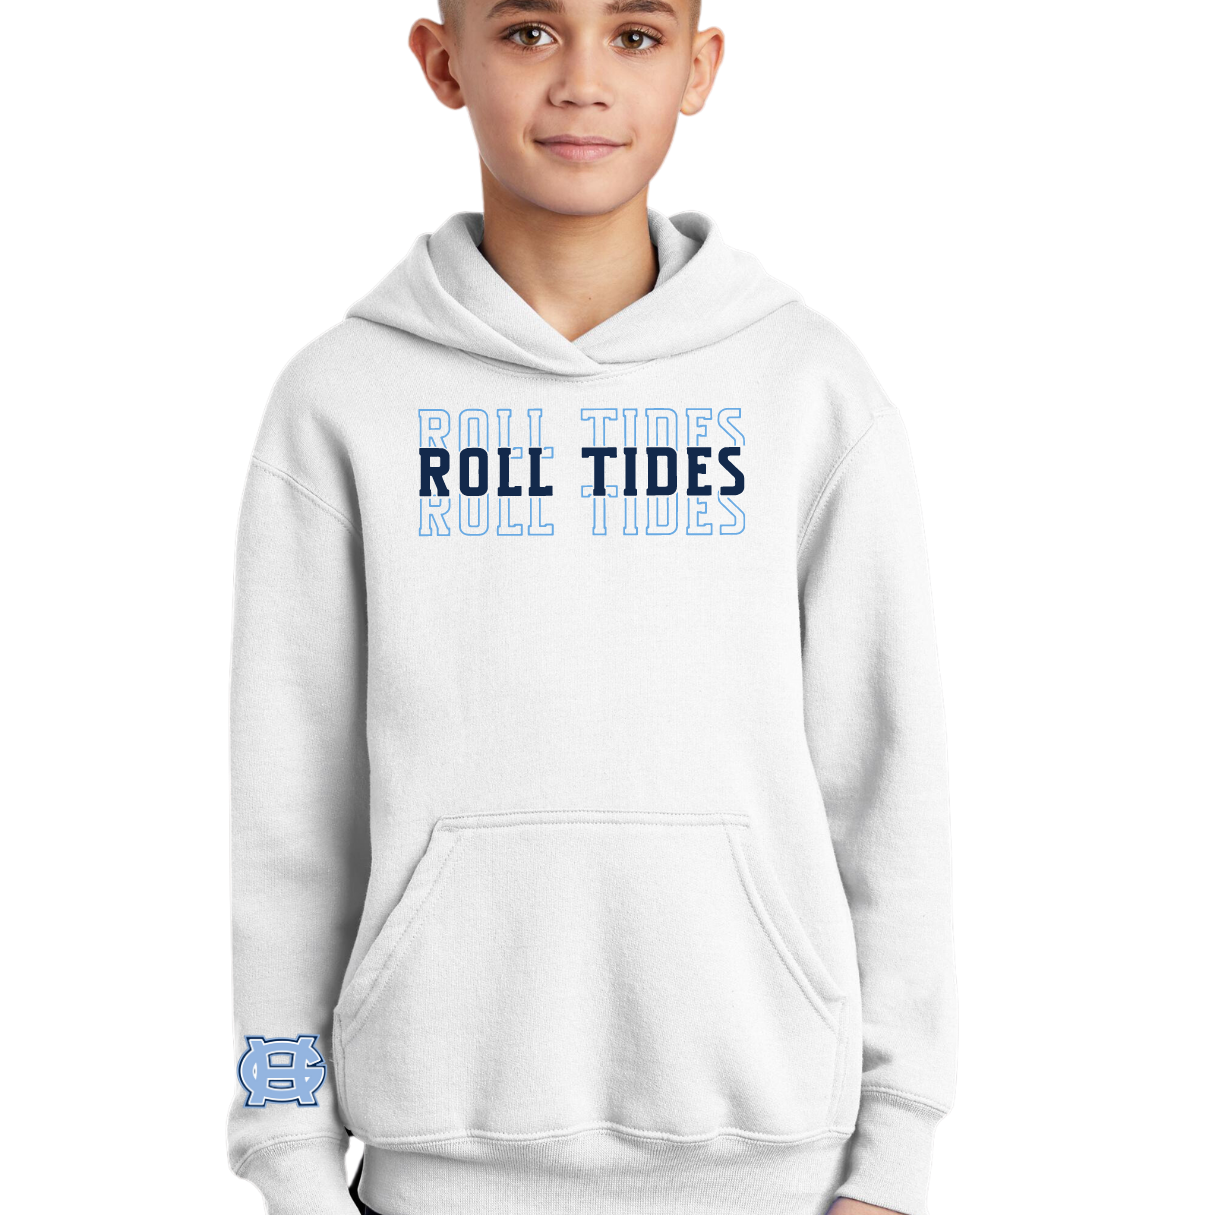 Roll Tides Hooded Sweatshirt - Adult and Youth